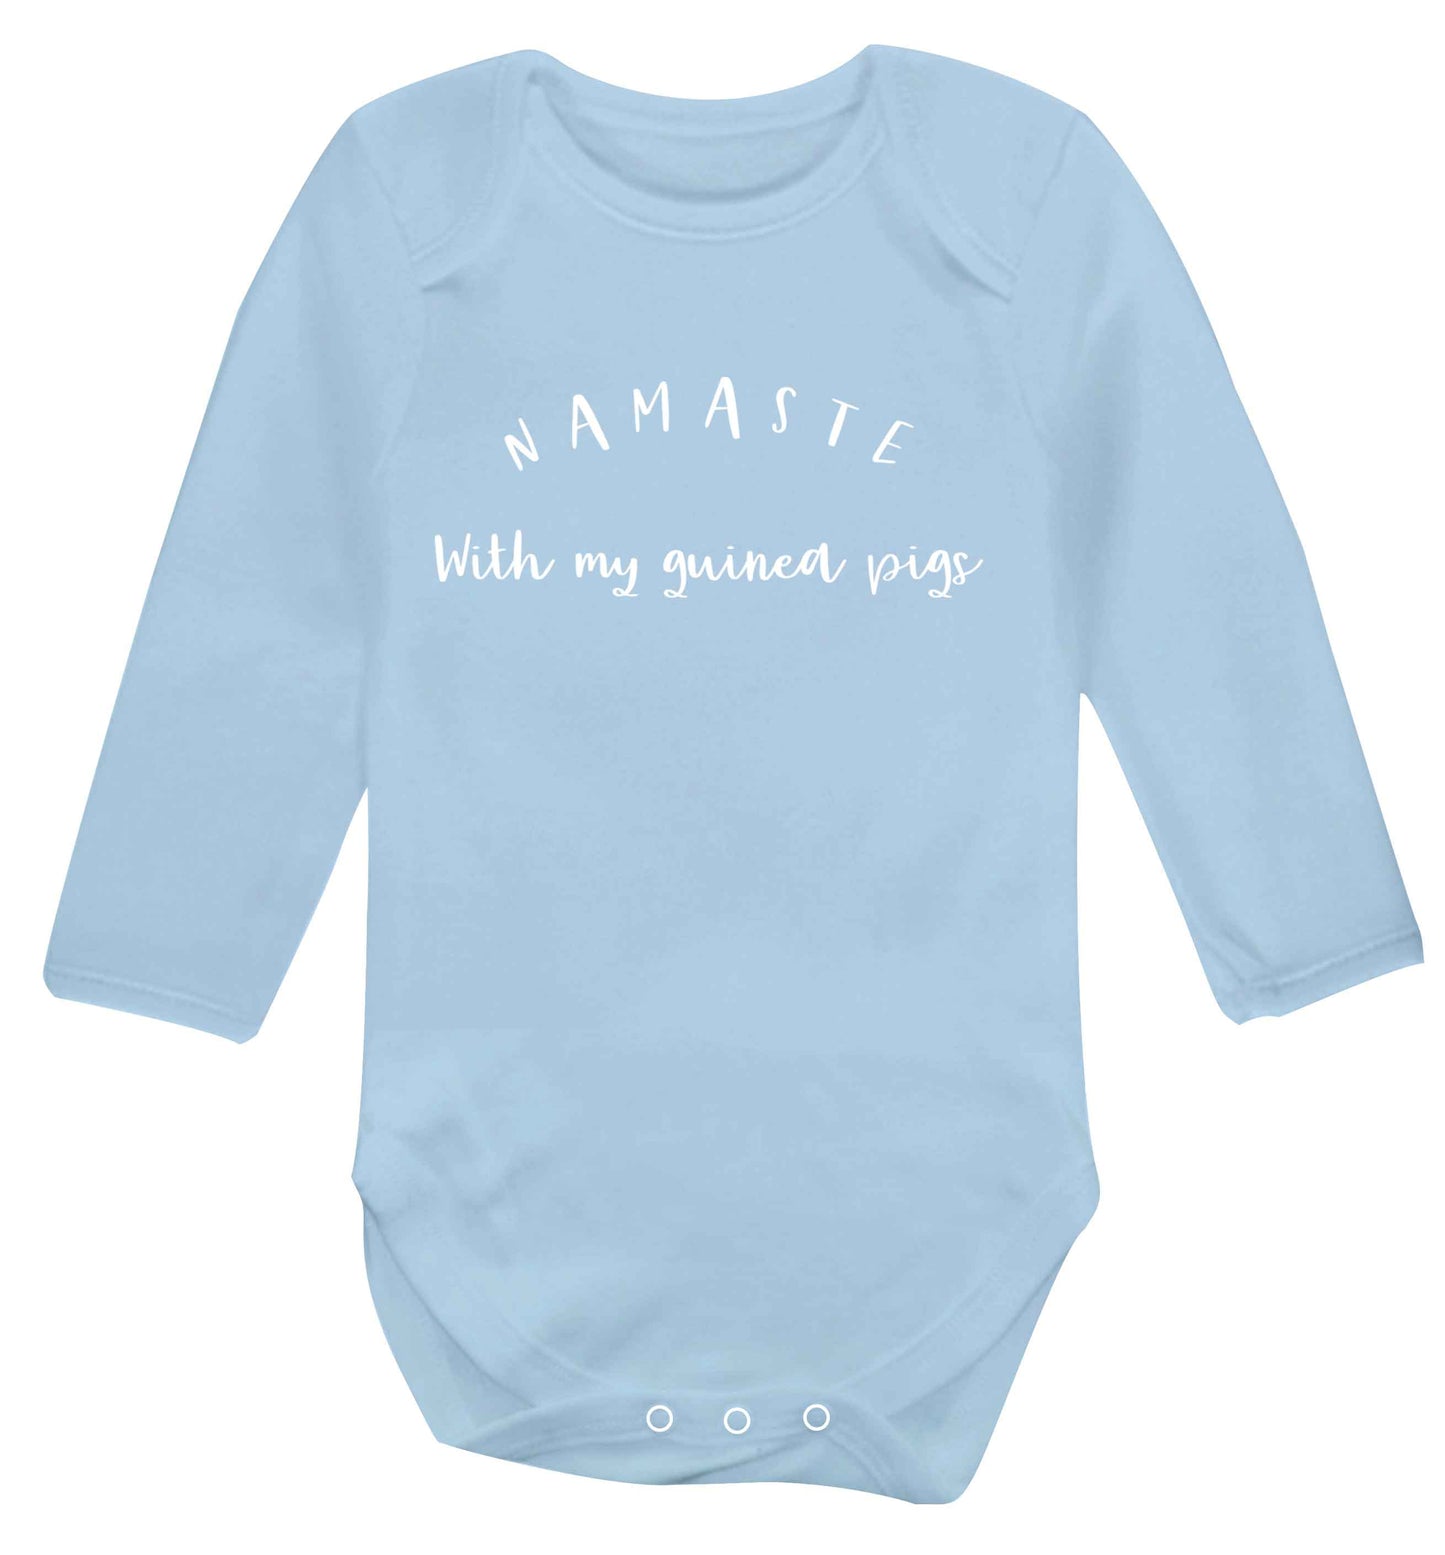 Namaste with my guinea pigs Baby Vest long sleeved pale blue 6-12 months